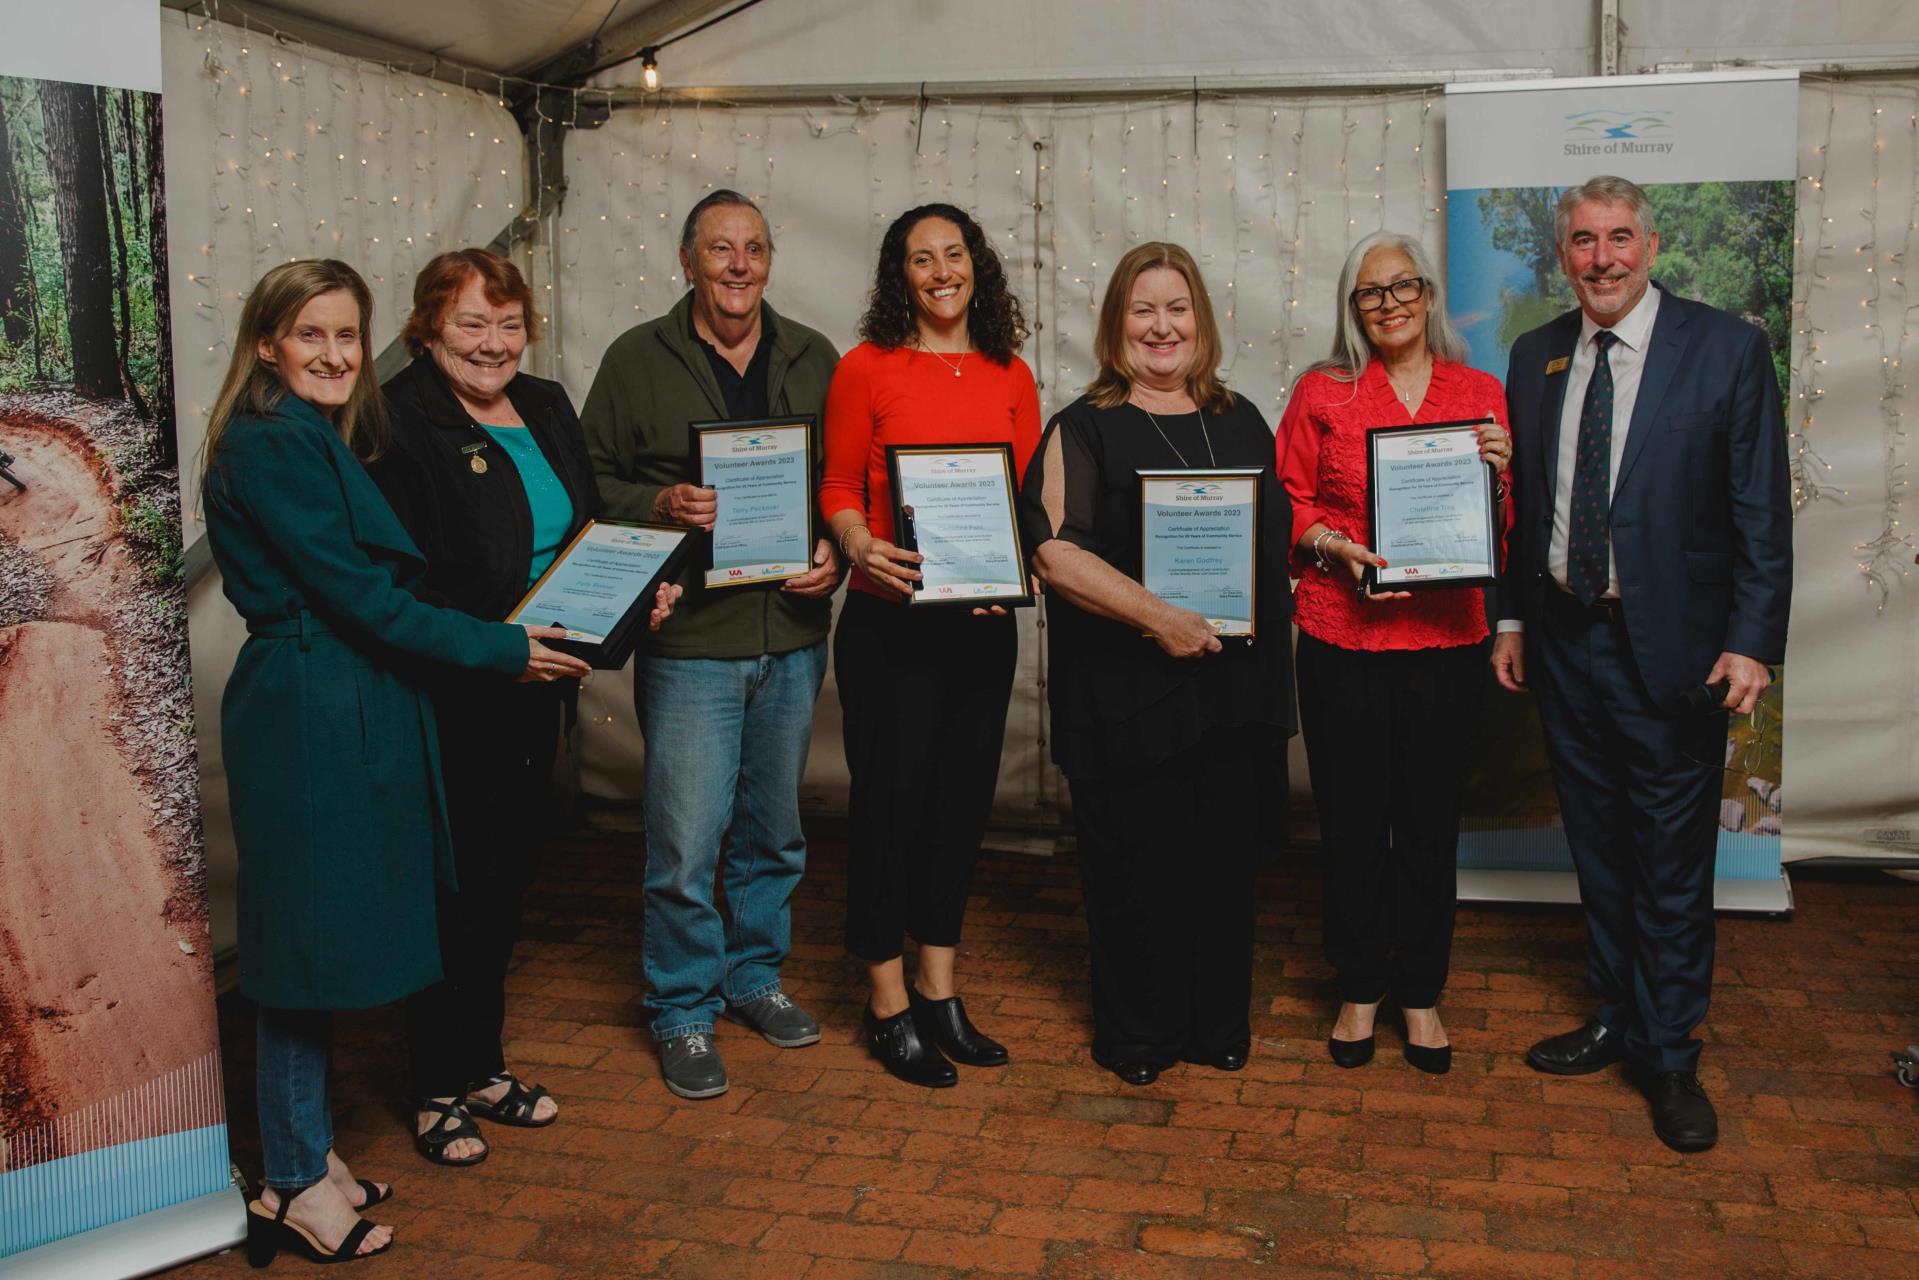 Acknowledge an Outstanding Volunteer in the Shire of Murray